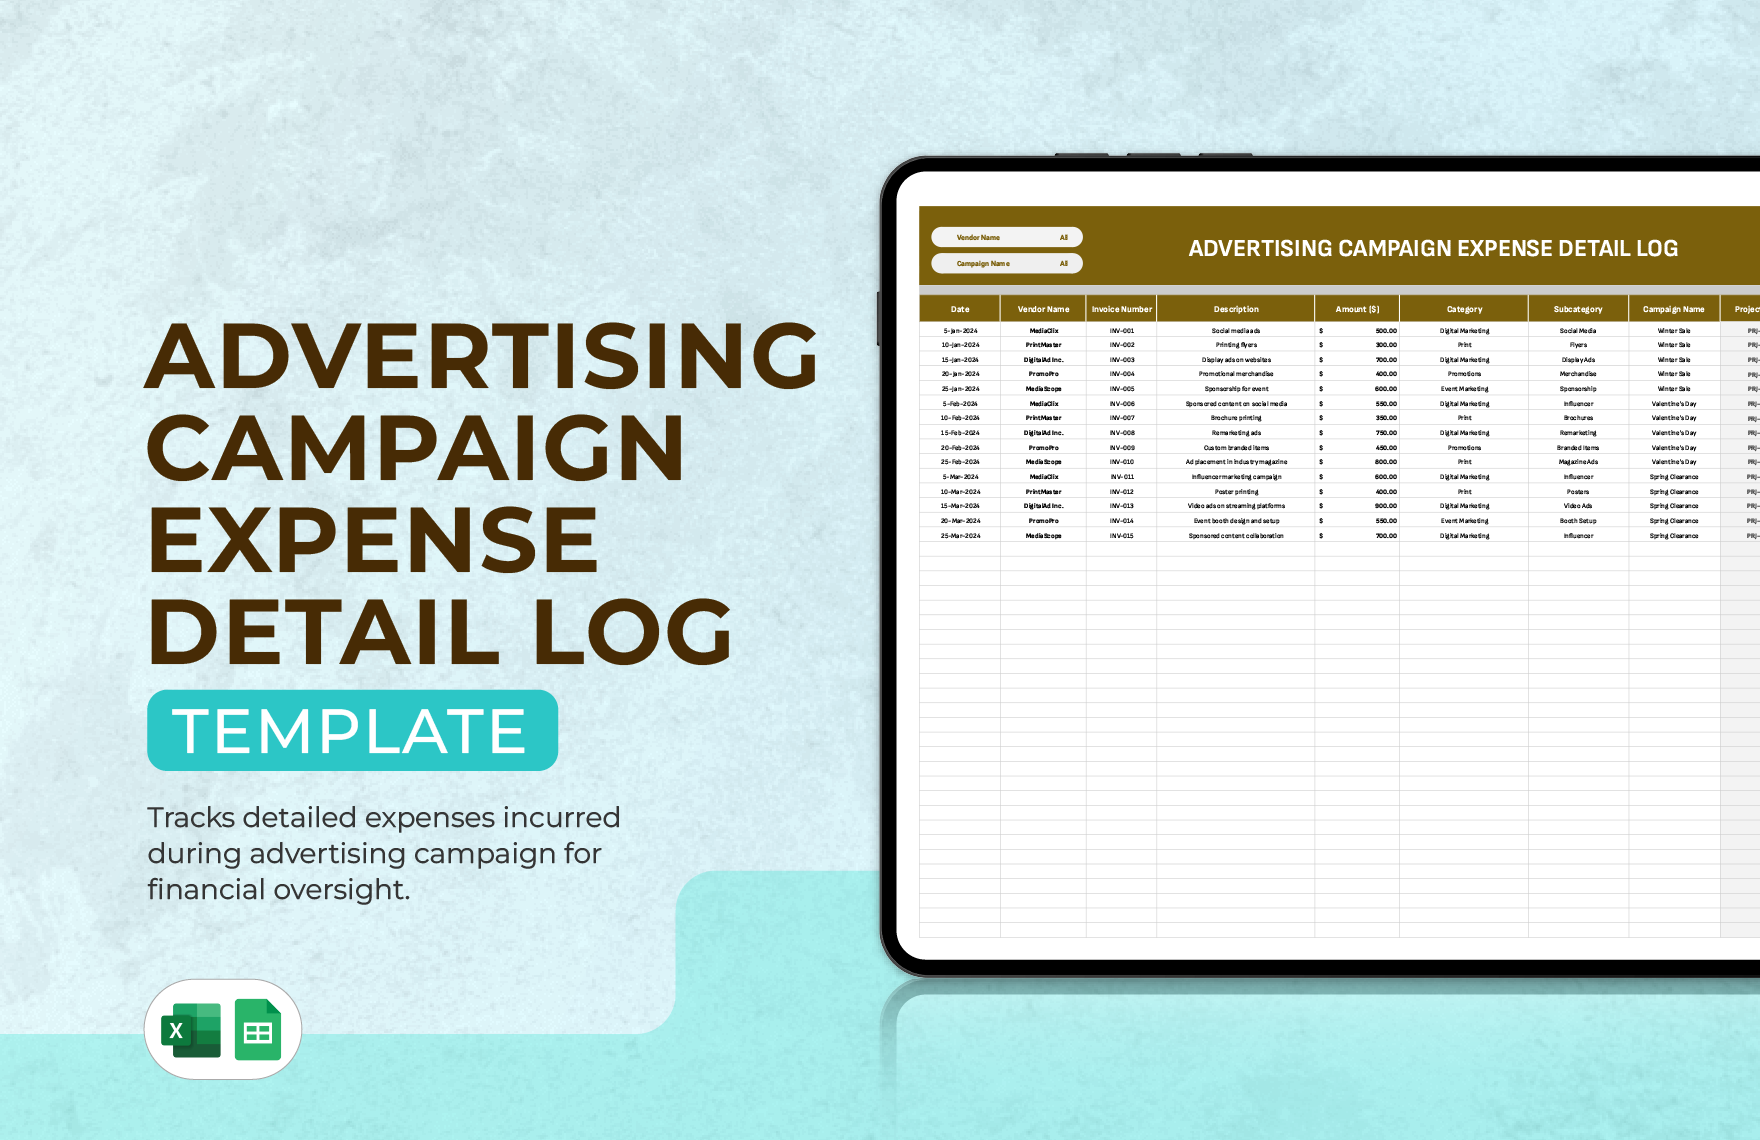 Advertising Campaign Expense Detail Log Template in Excel, Google Sheets